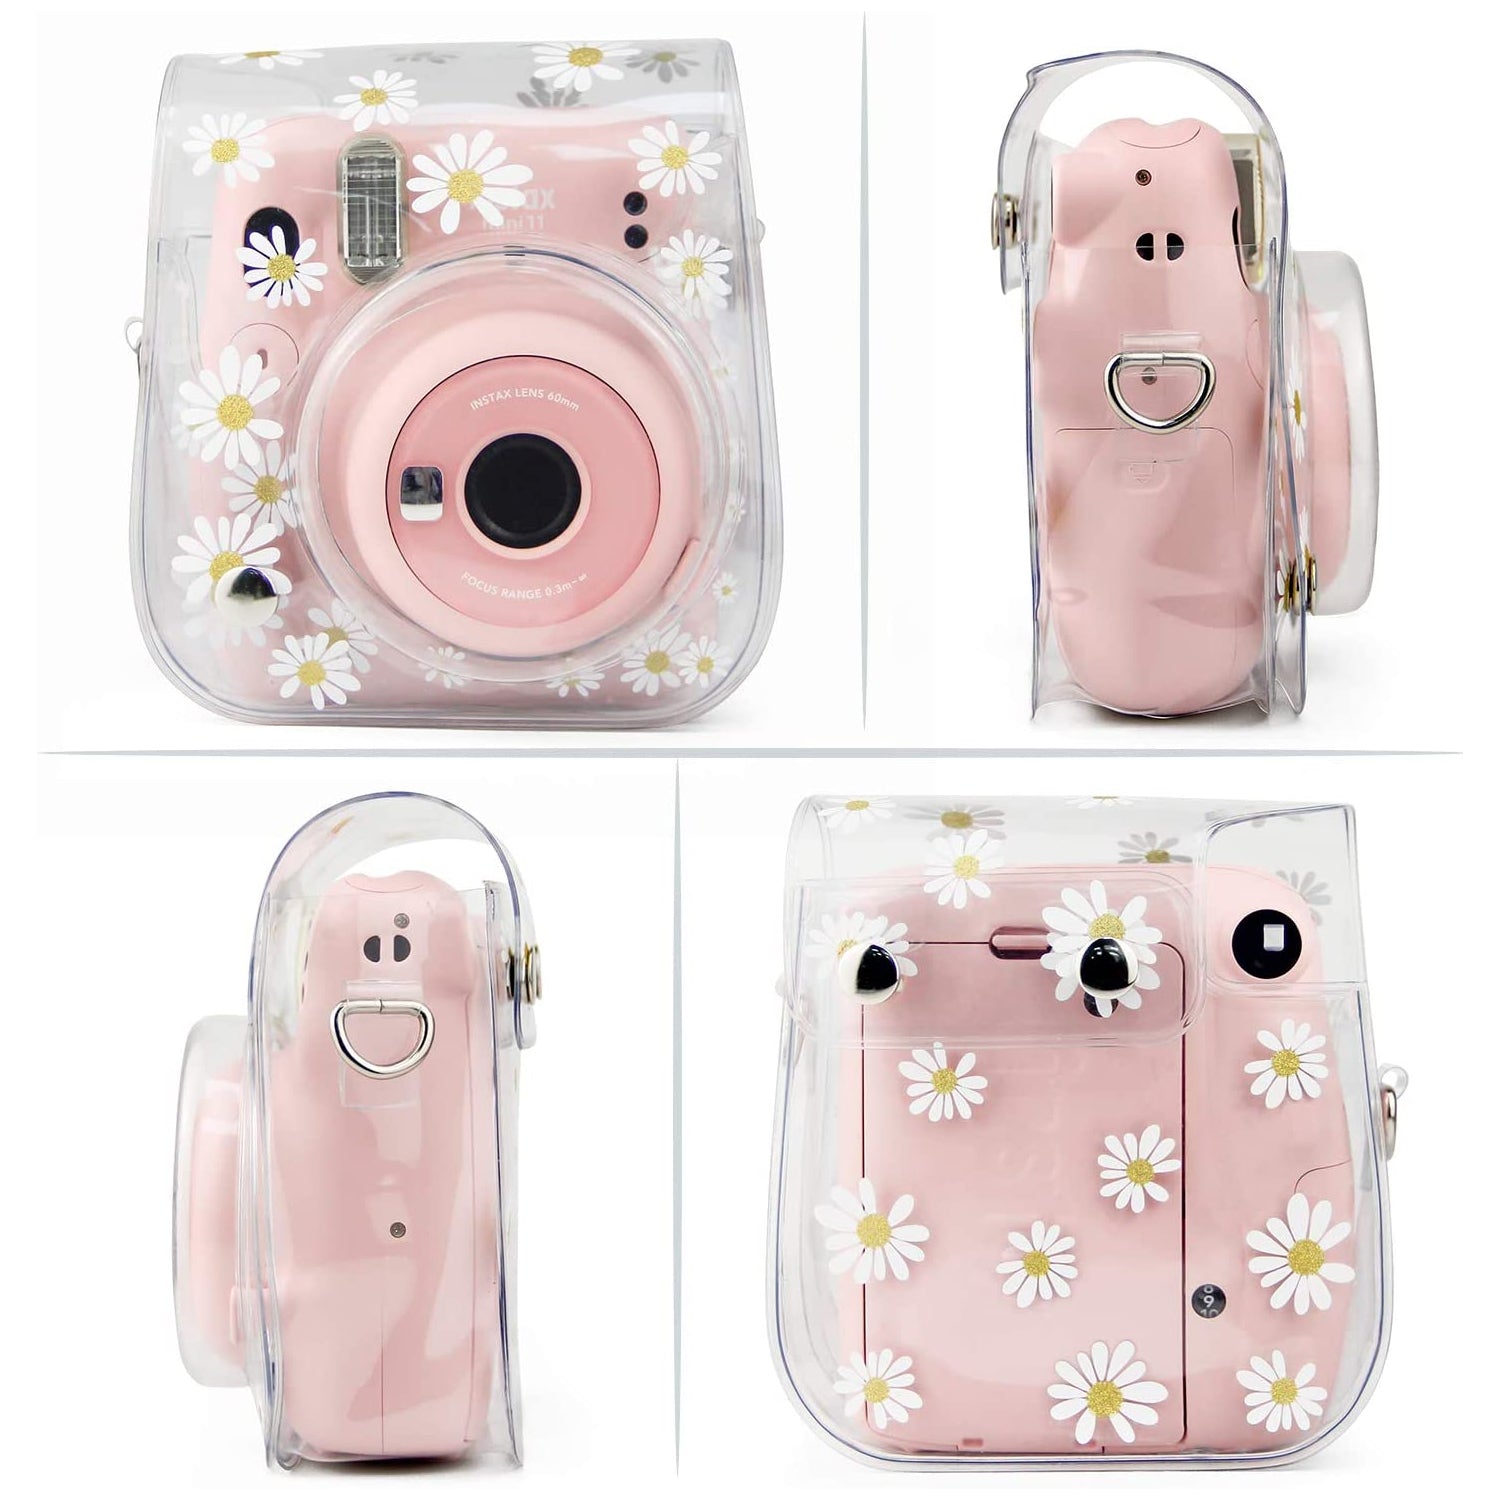 Zenko Compatible Mini 11 Camera Case Bundle with Album, Filters and Other Accessories for Fujifilm Instax Mini 11 (Transparent Daisy 1, 7 Items)